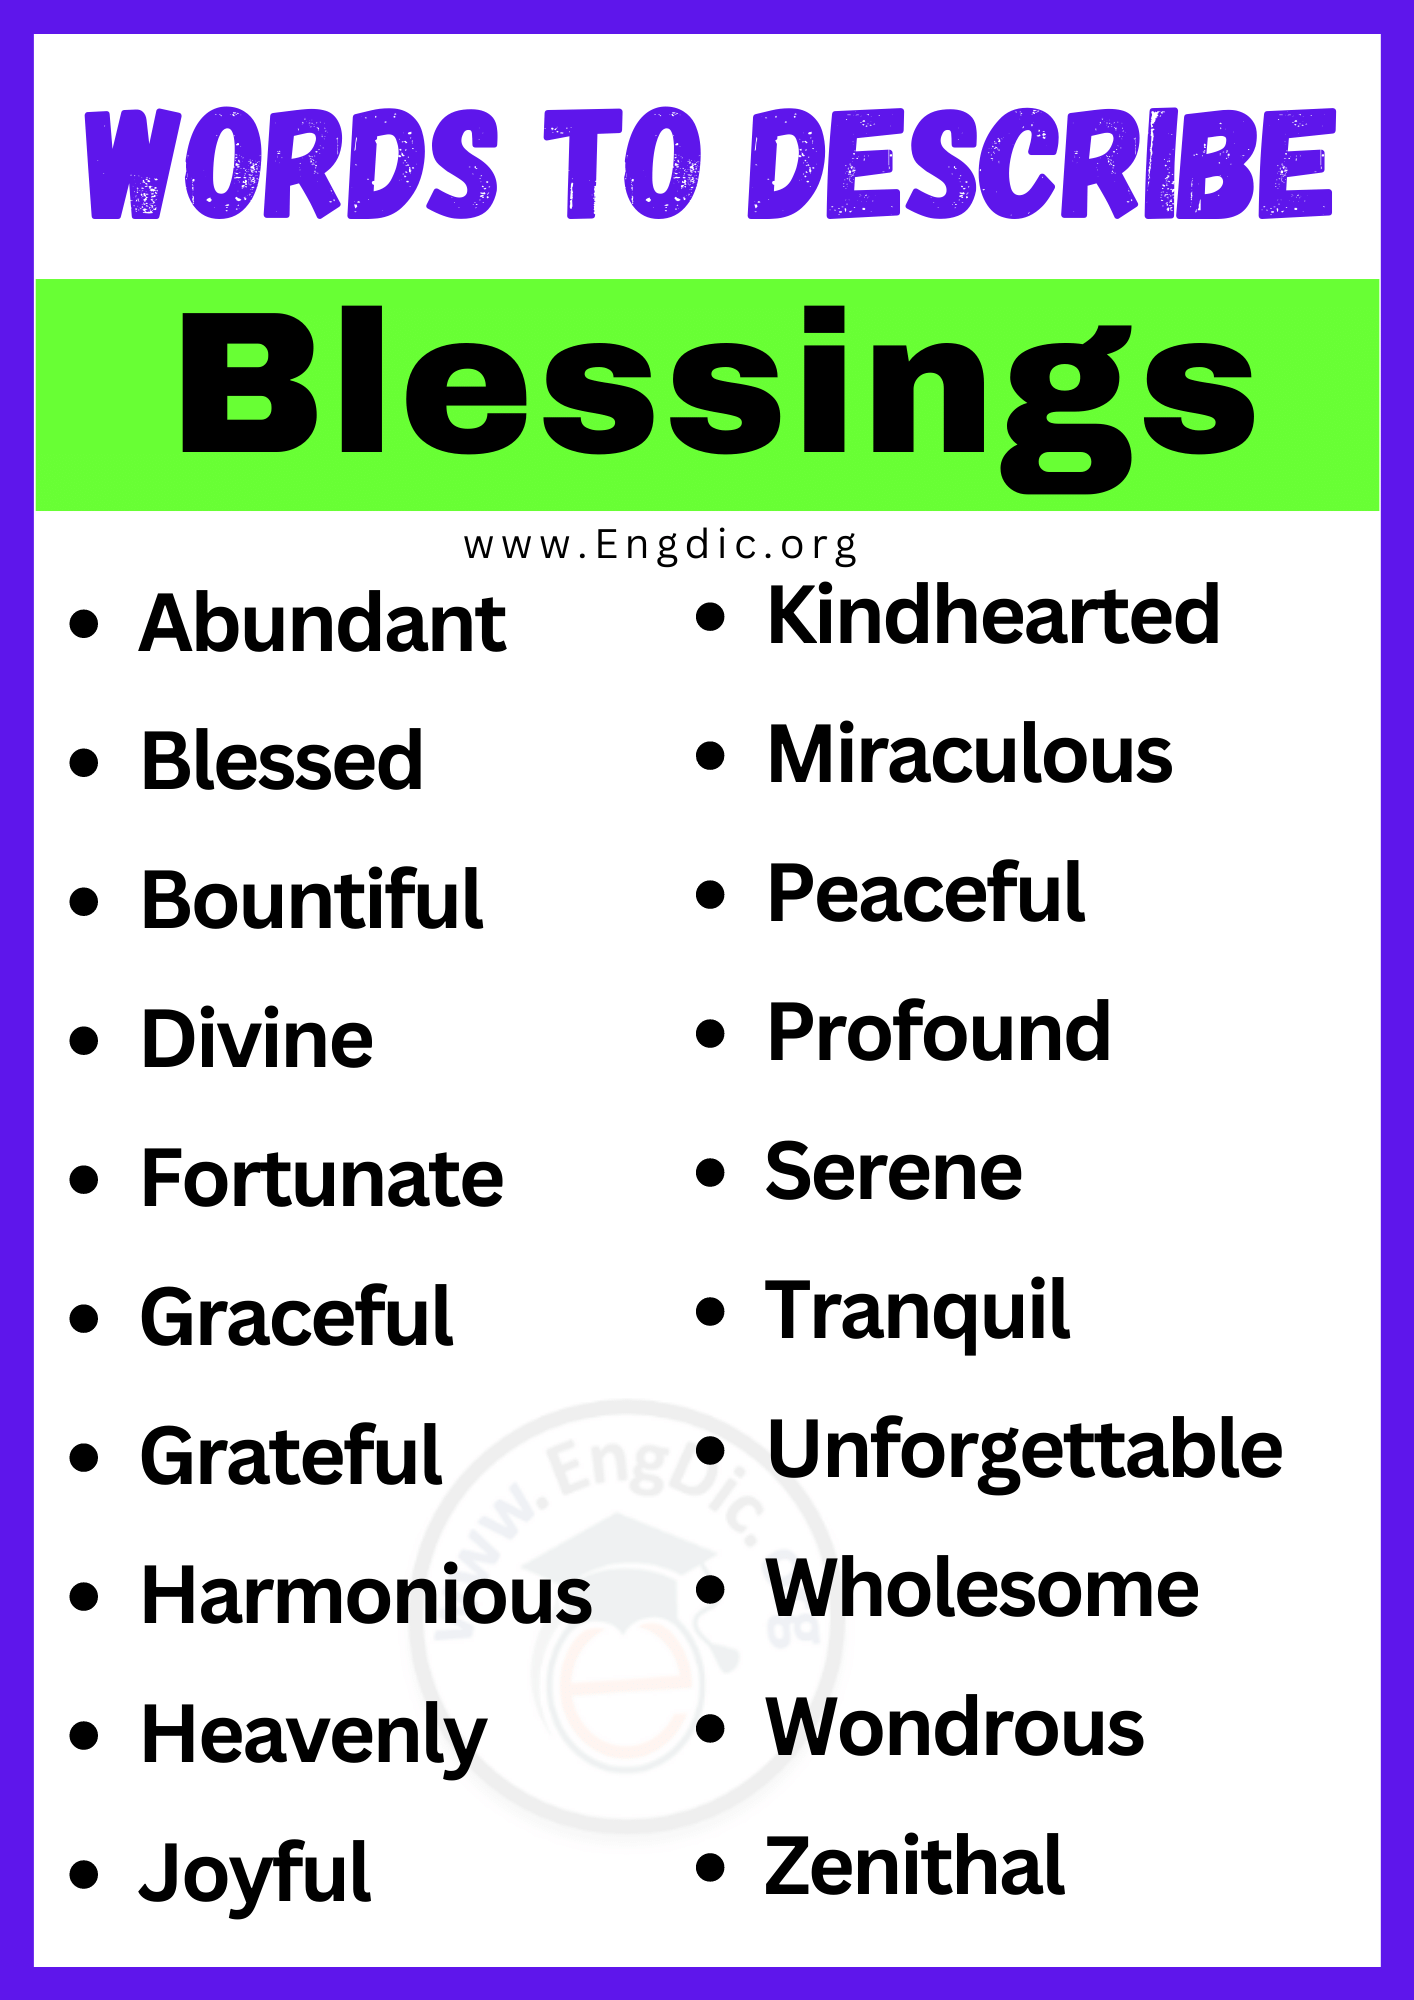 Words to Describe Blessings